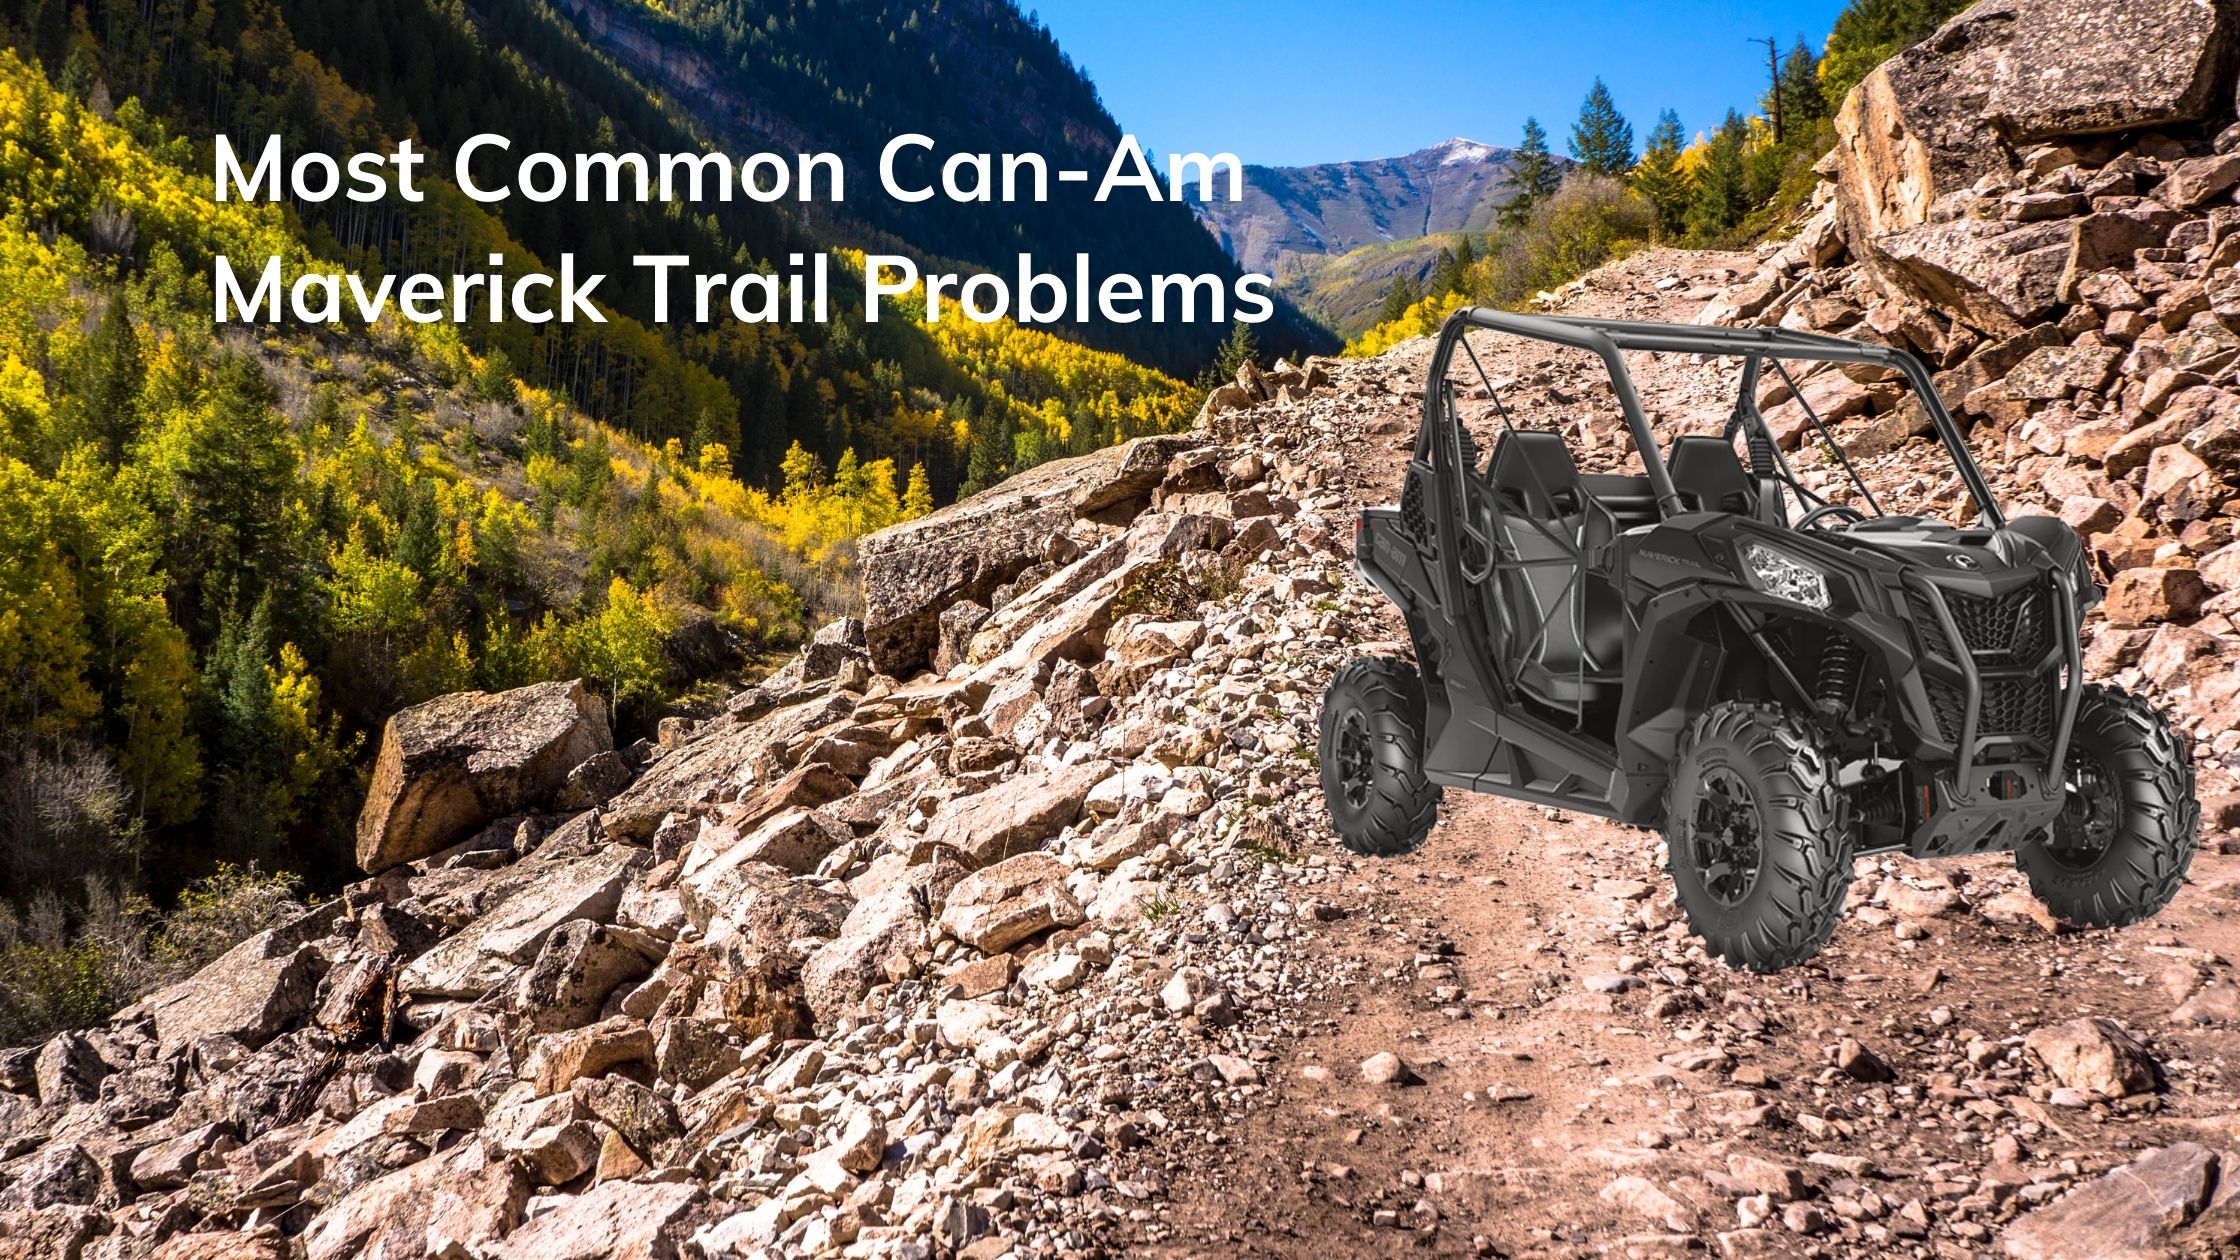 Most Common Can-Am Maverick Trail Problems